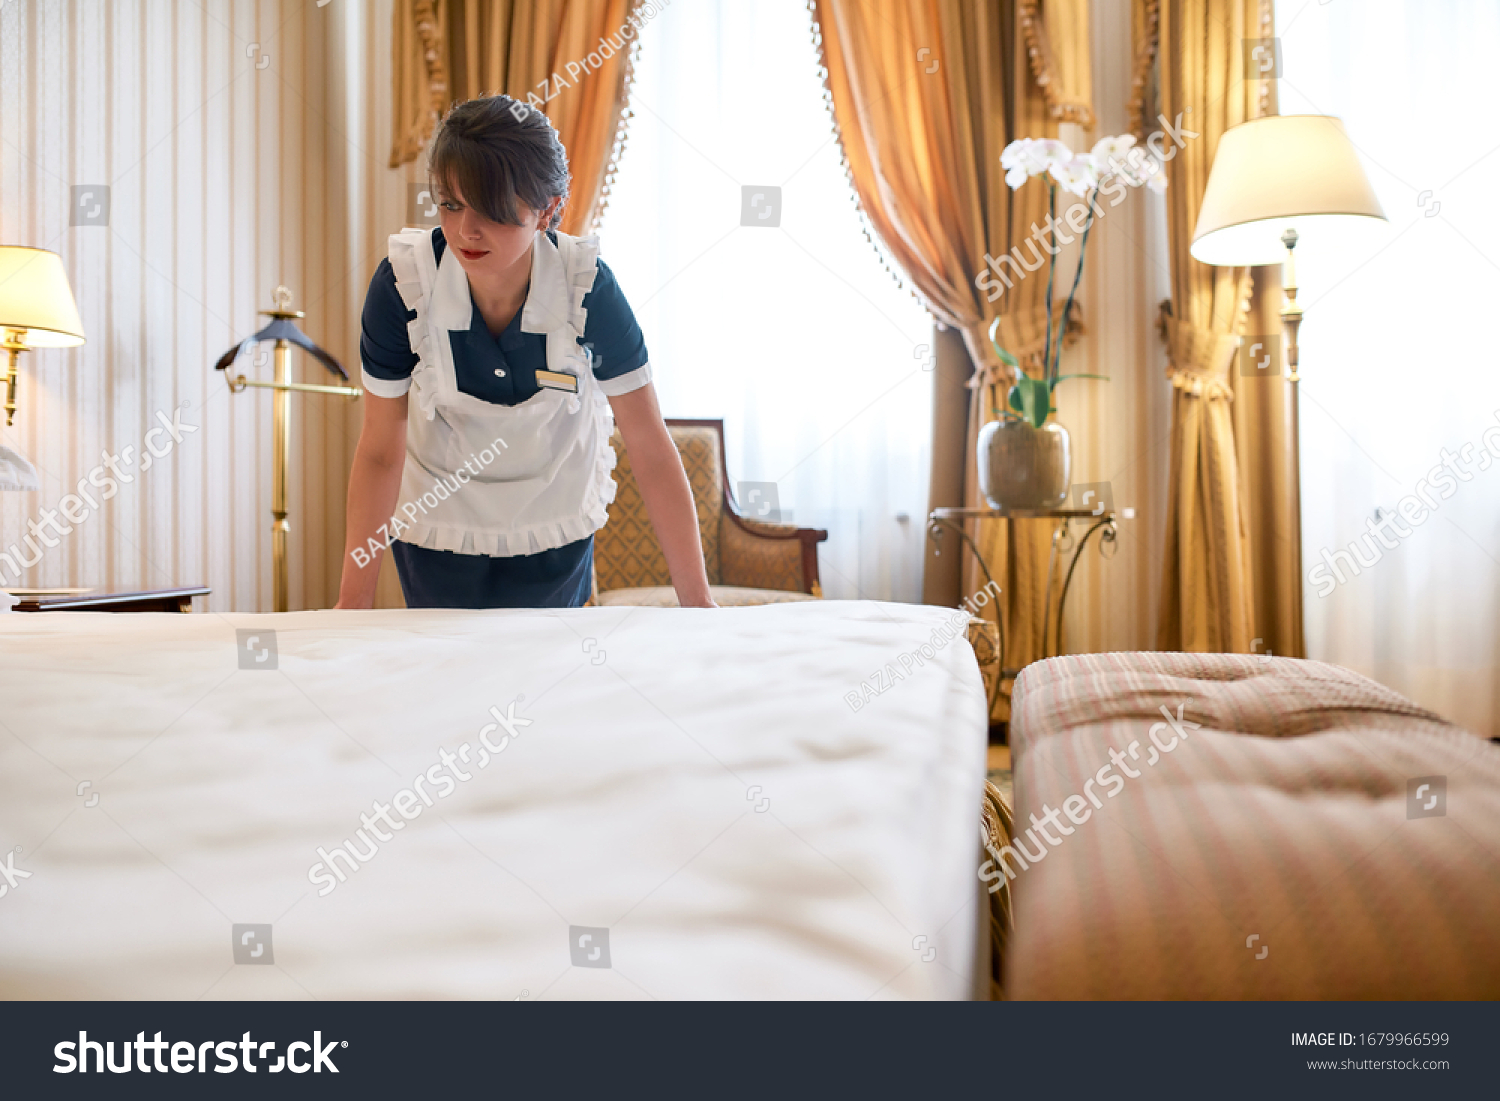 Hotel maid in uniform changing linen and making bed in luxury hotel room. Room service concept. Horizontal shot #1679966599